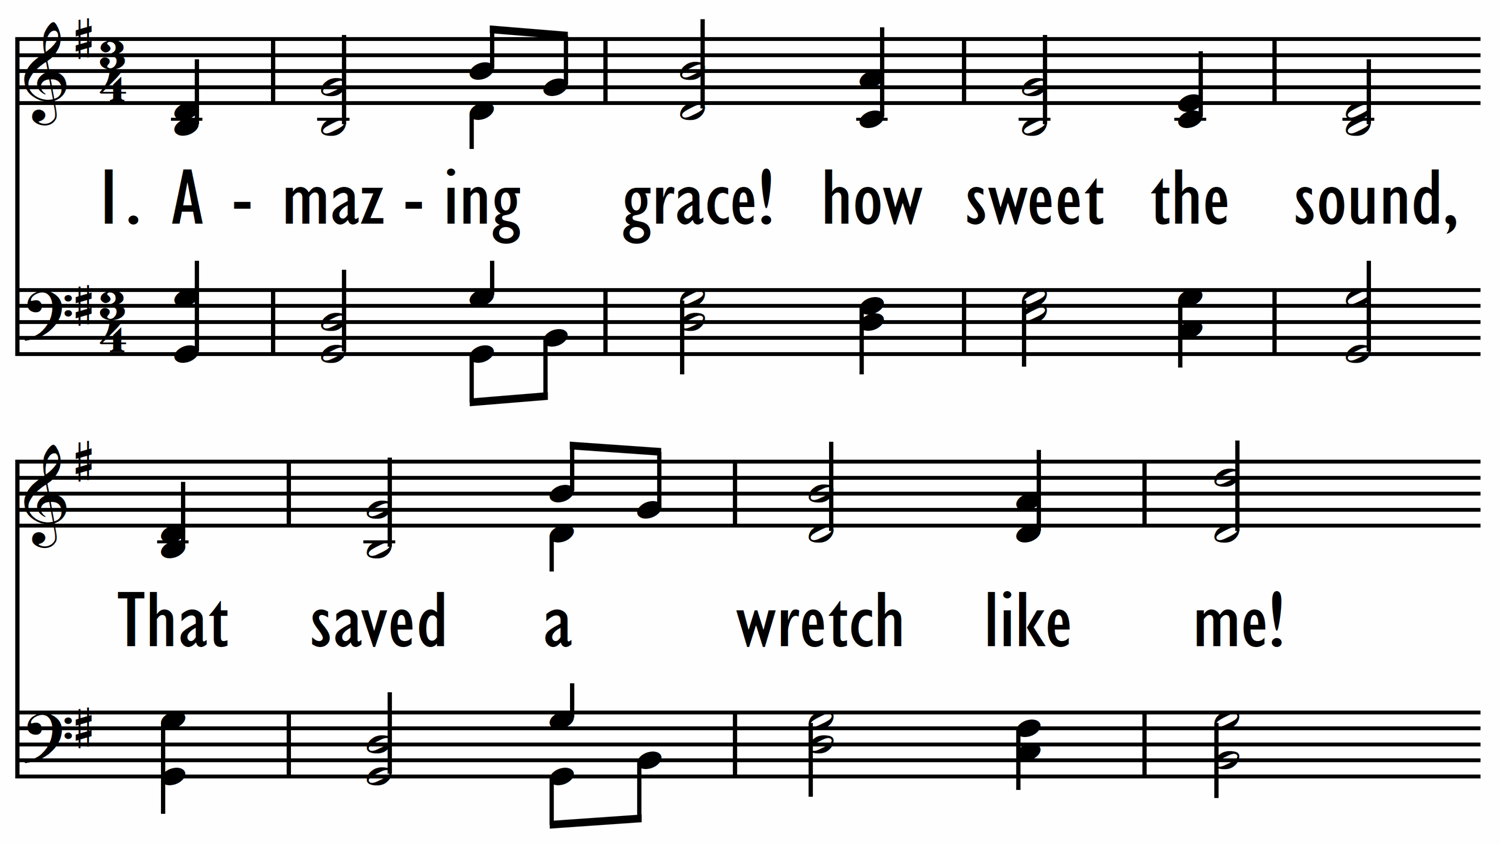 AMAZING GRACE! HOW SWEET THE SOUND-ppt